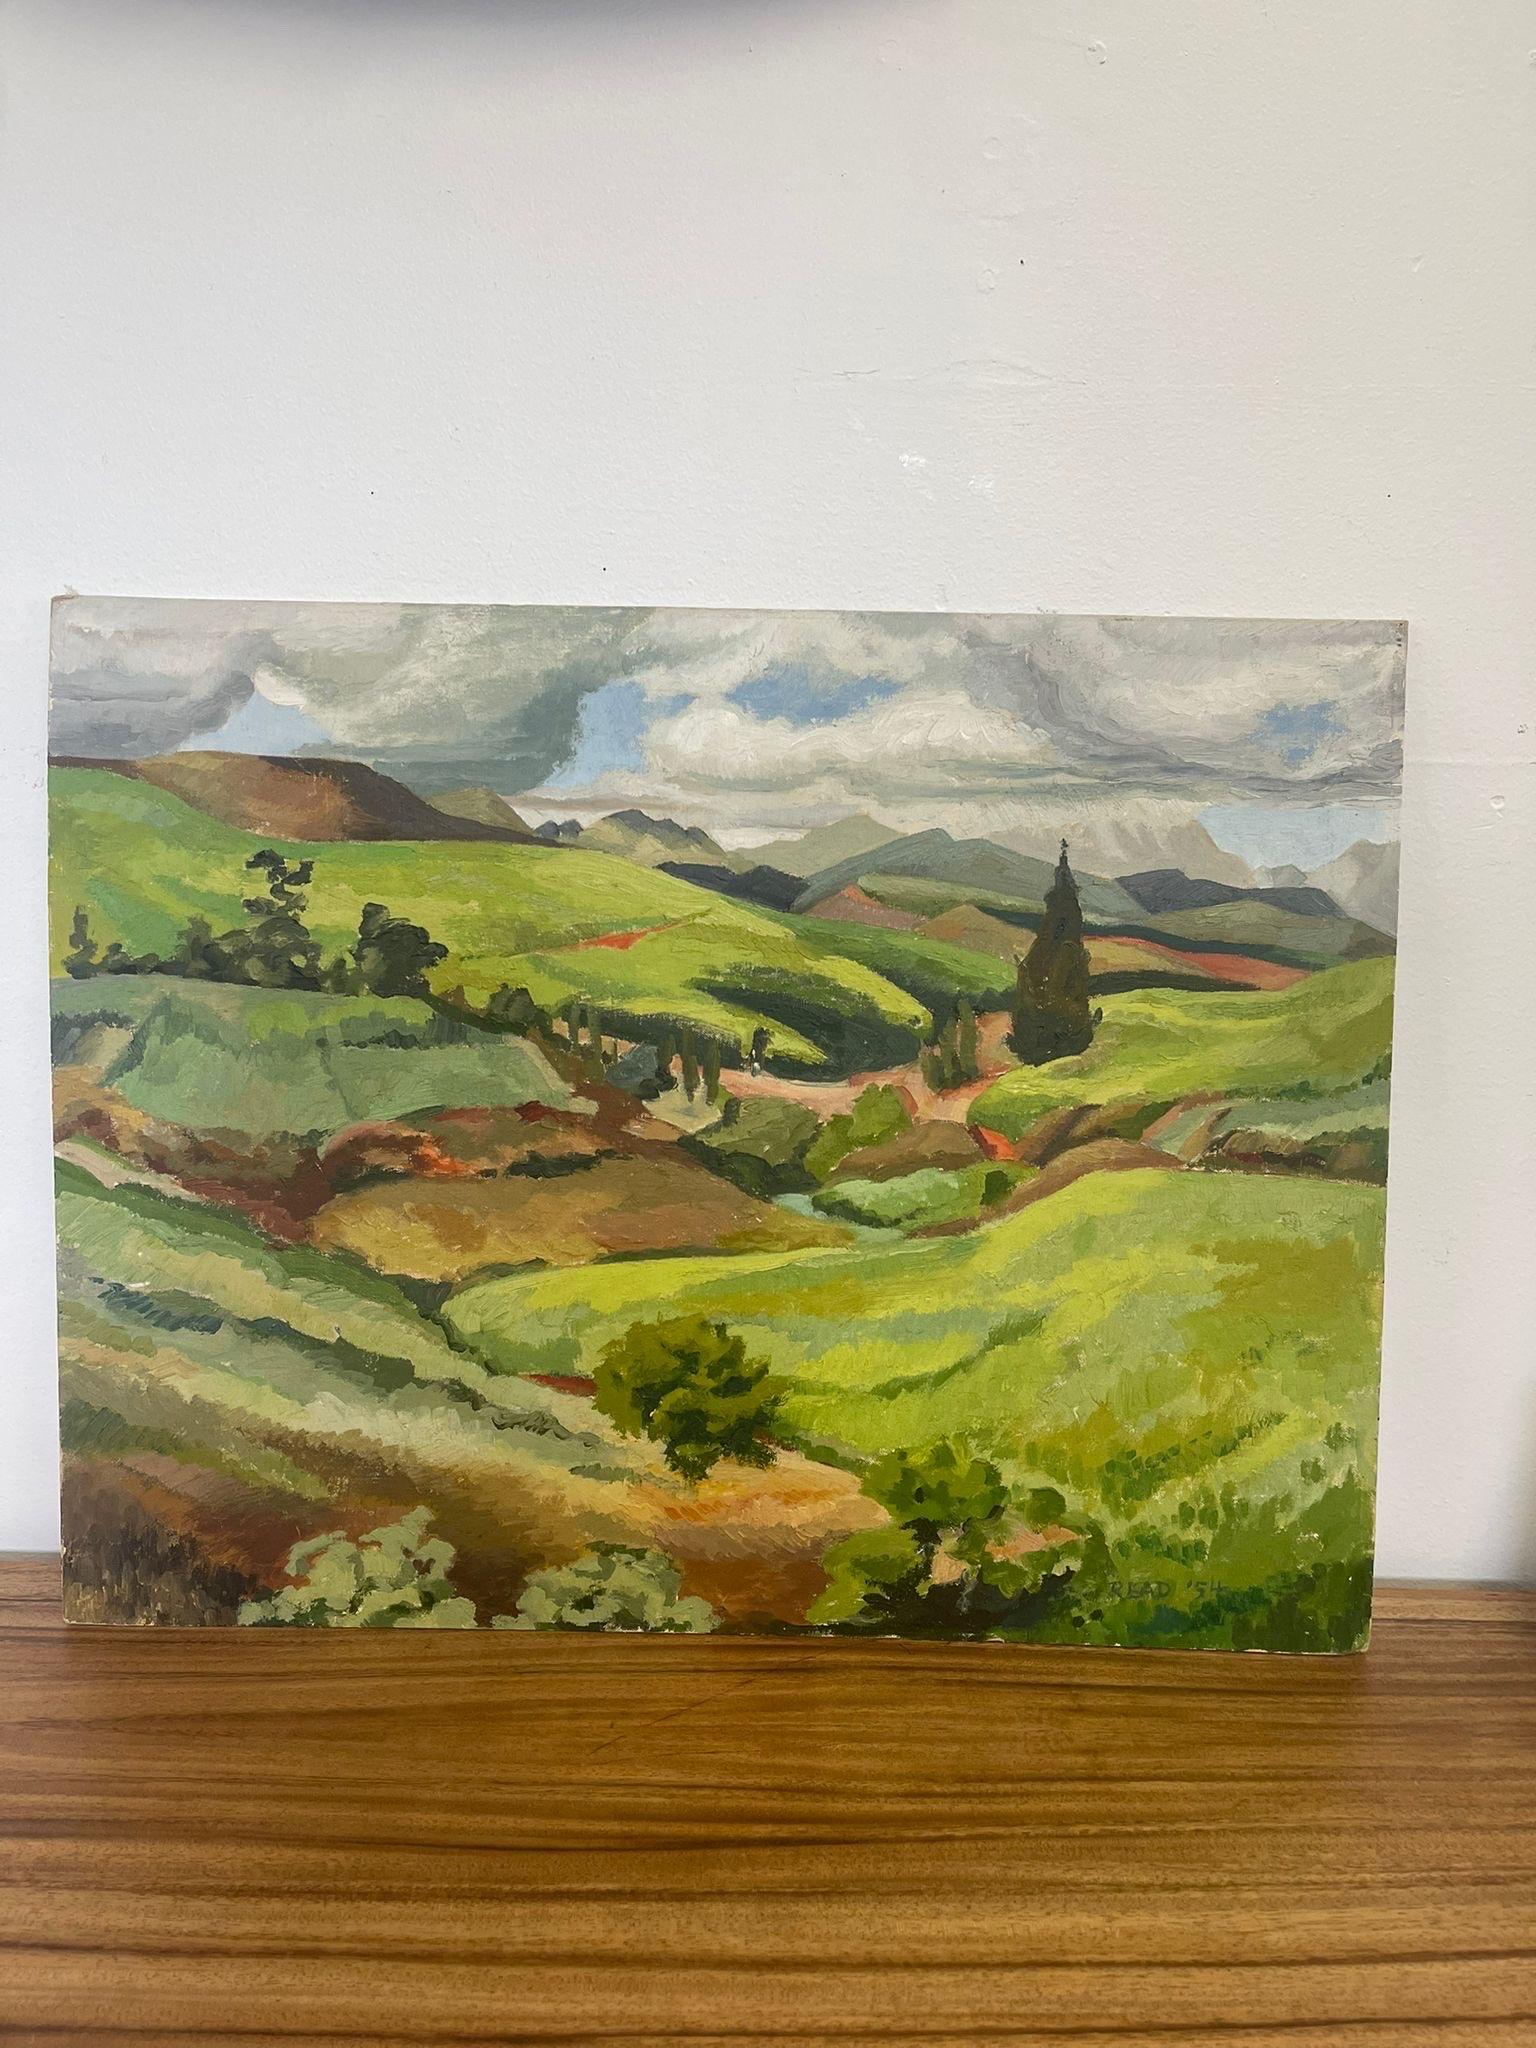 Landscape painting of rolling green fields. Possibly acrylic paint. Signed and dated in the lower corner, 1954. Vintage Condition Consistent with Age as Pictured.

Dimensions. 30 W ; 1/4 D ; 28 H